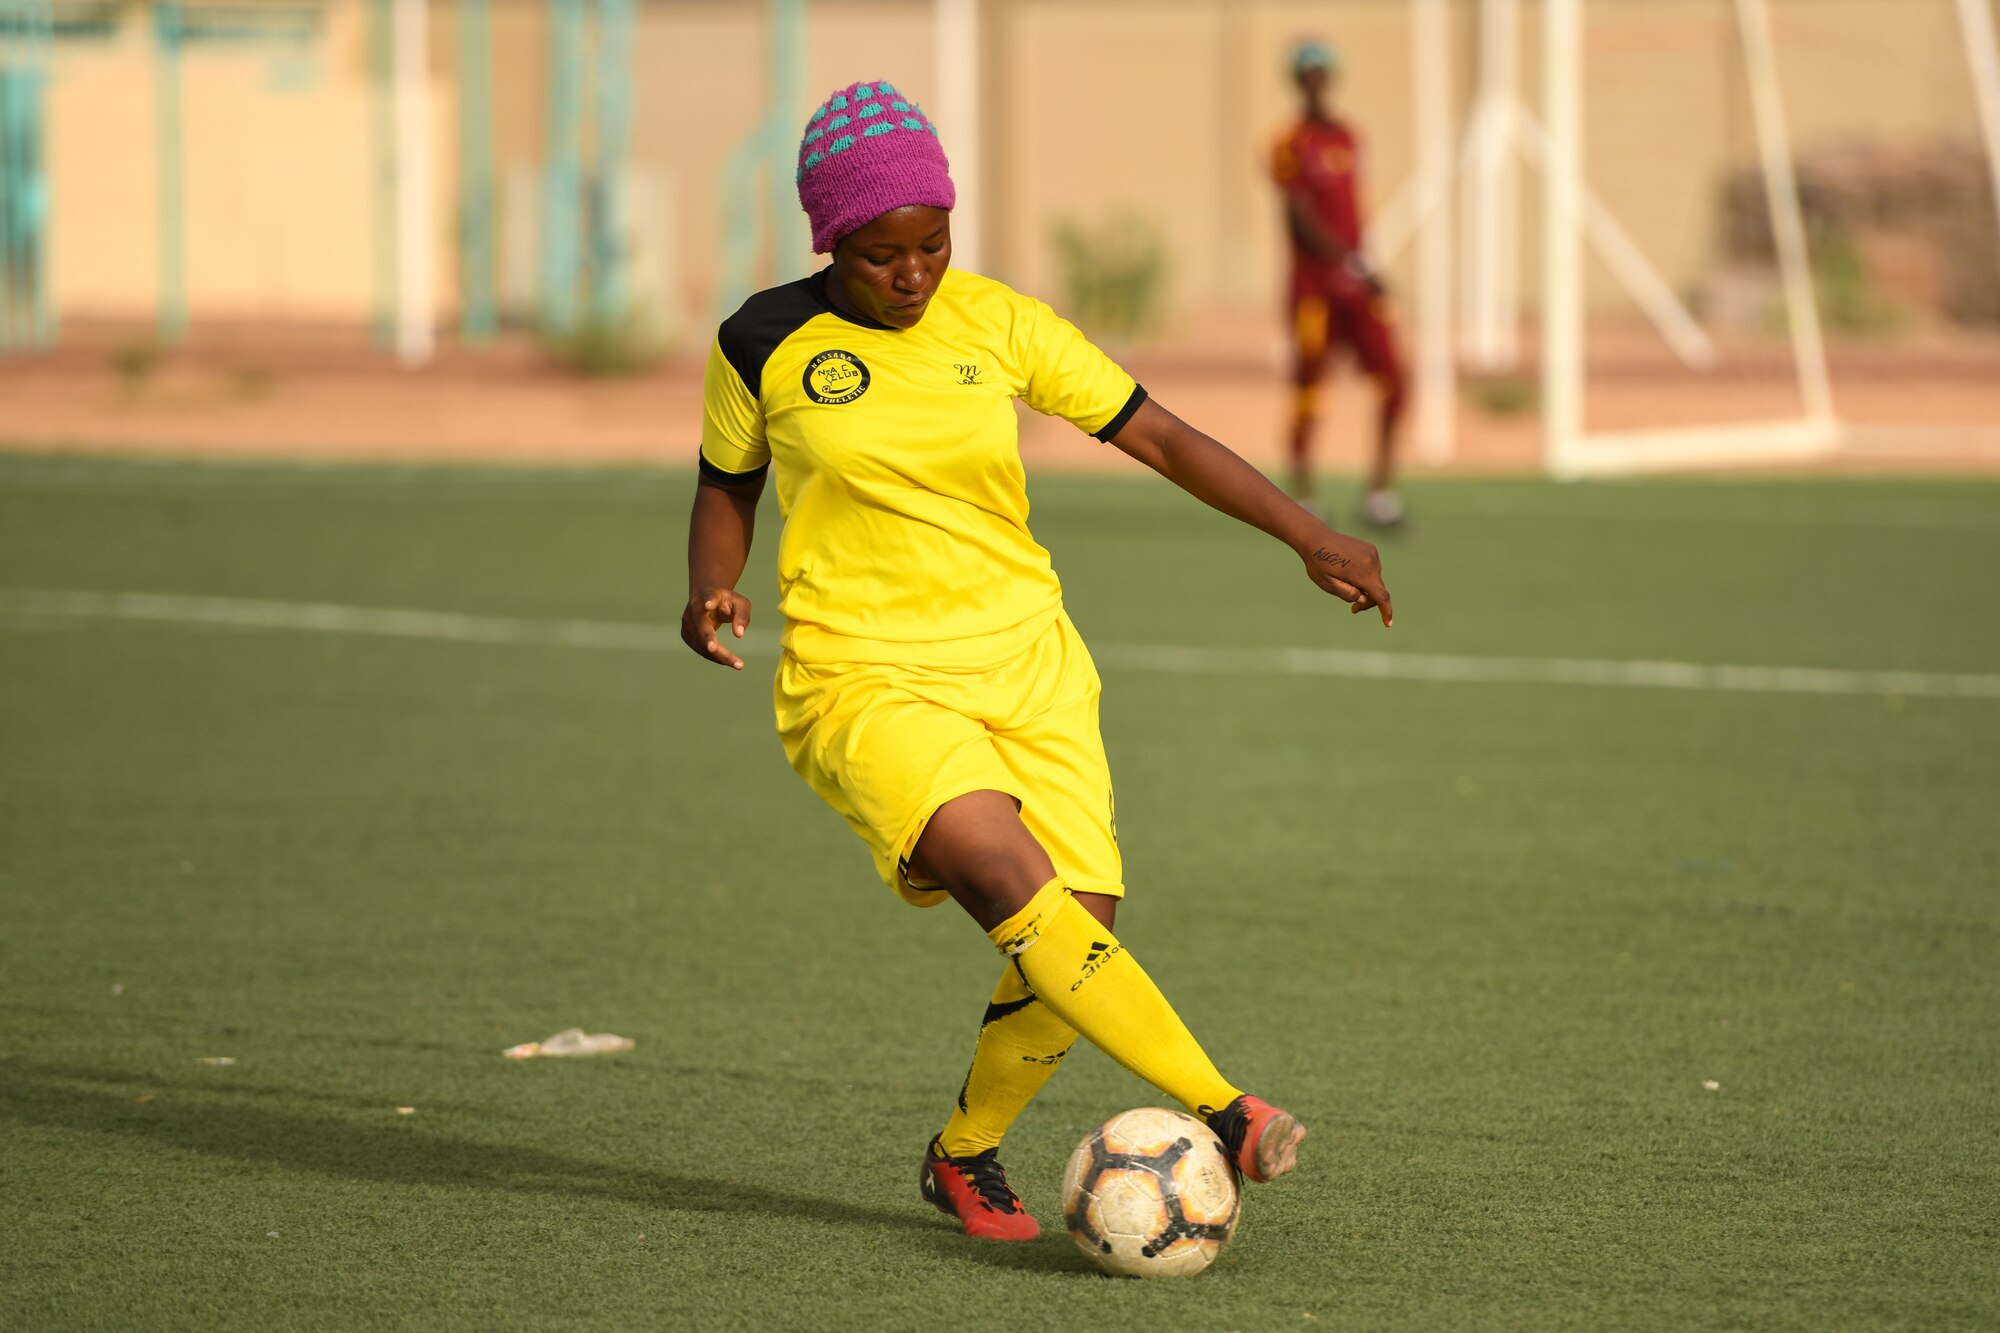 A player from the Nassara Athletic Club Women’s Soccer Team maneuvers a soccer ball during a game against U.S. Air Force women from Nigerien Air Base 201 at the Agadez Sports Stadium in Agadez, Niger, July 5, 2019.  The civil affairs team organized the community outreach event that also included the donation of soccer balls to the women’s team and youth development team. (U.S. Air Force photo by Senior Airman Lexie West)